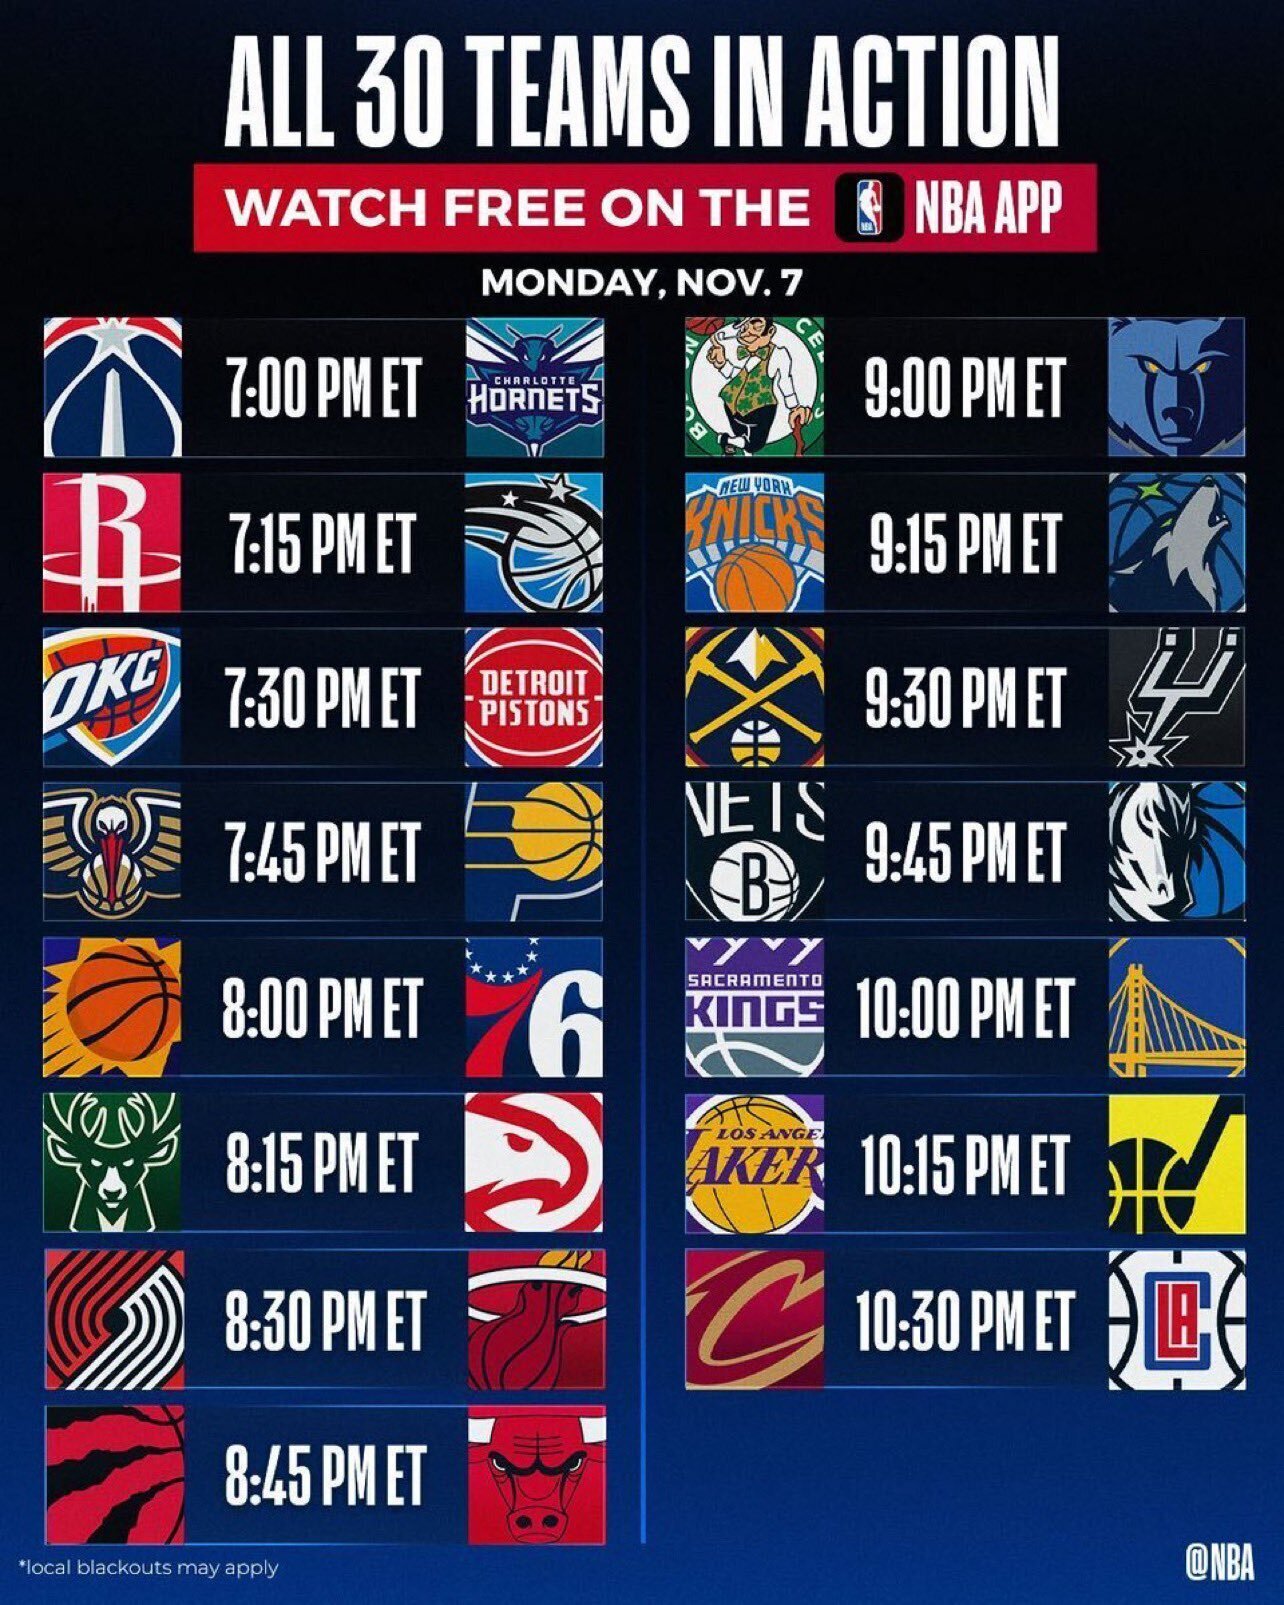 NBA CrunchTime: Full schedule and how to watch free with the NBA App